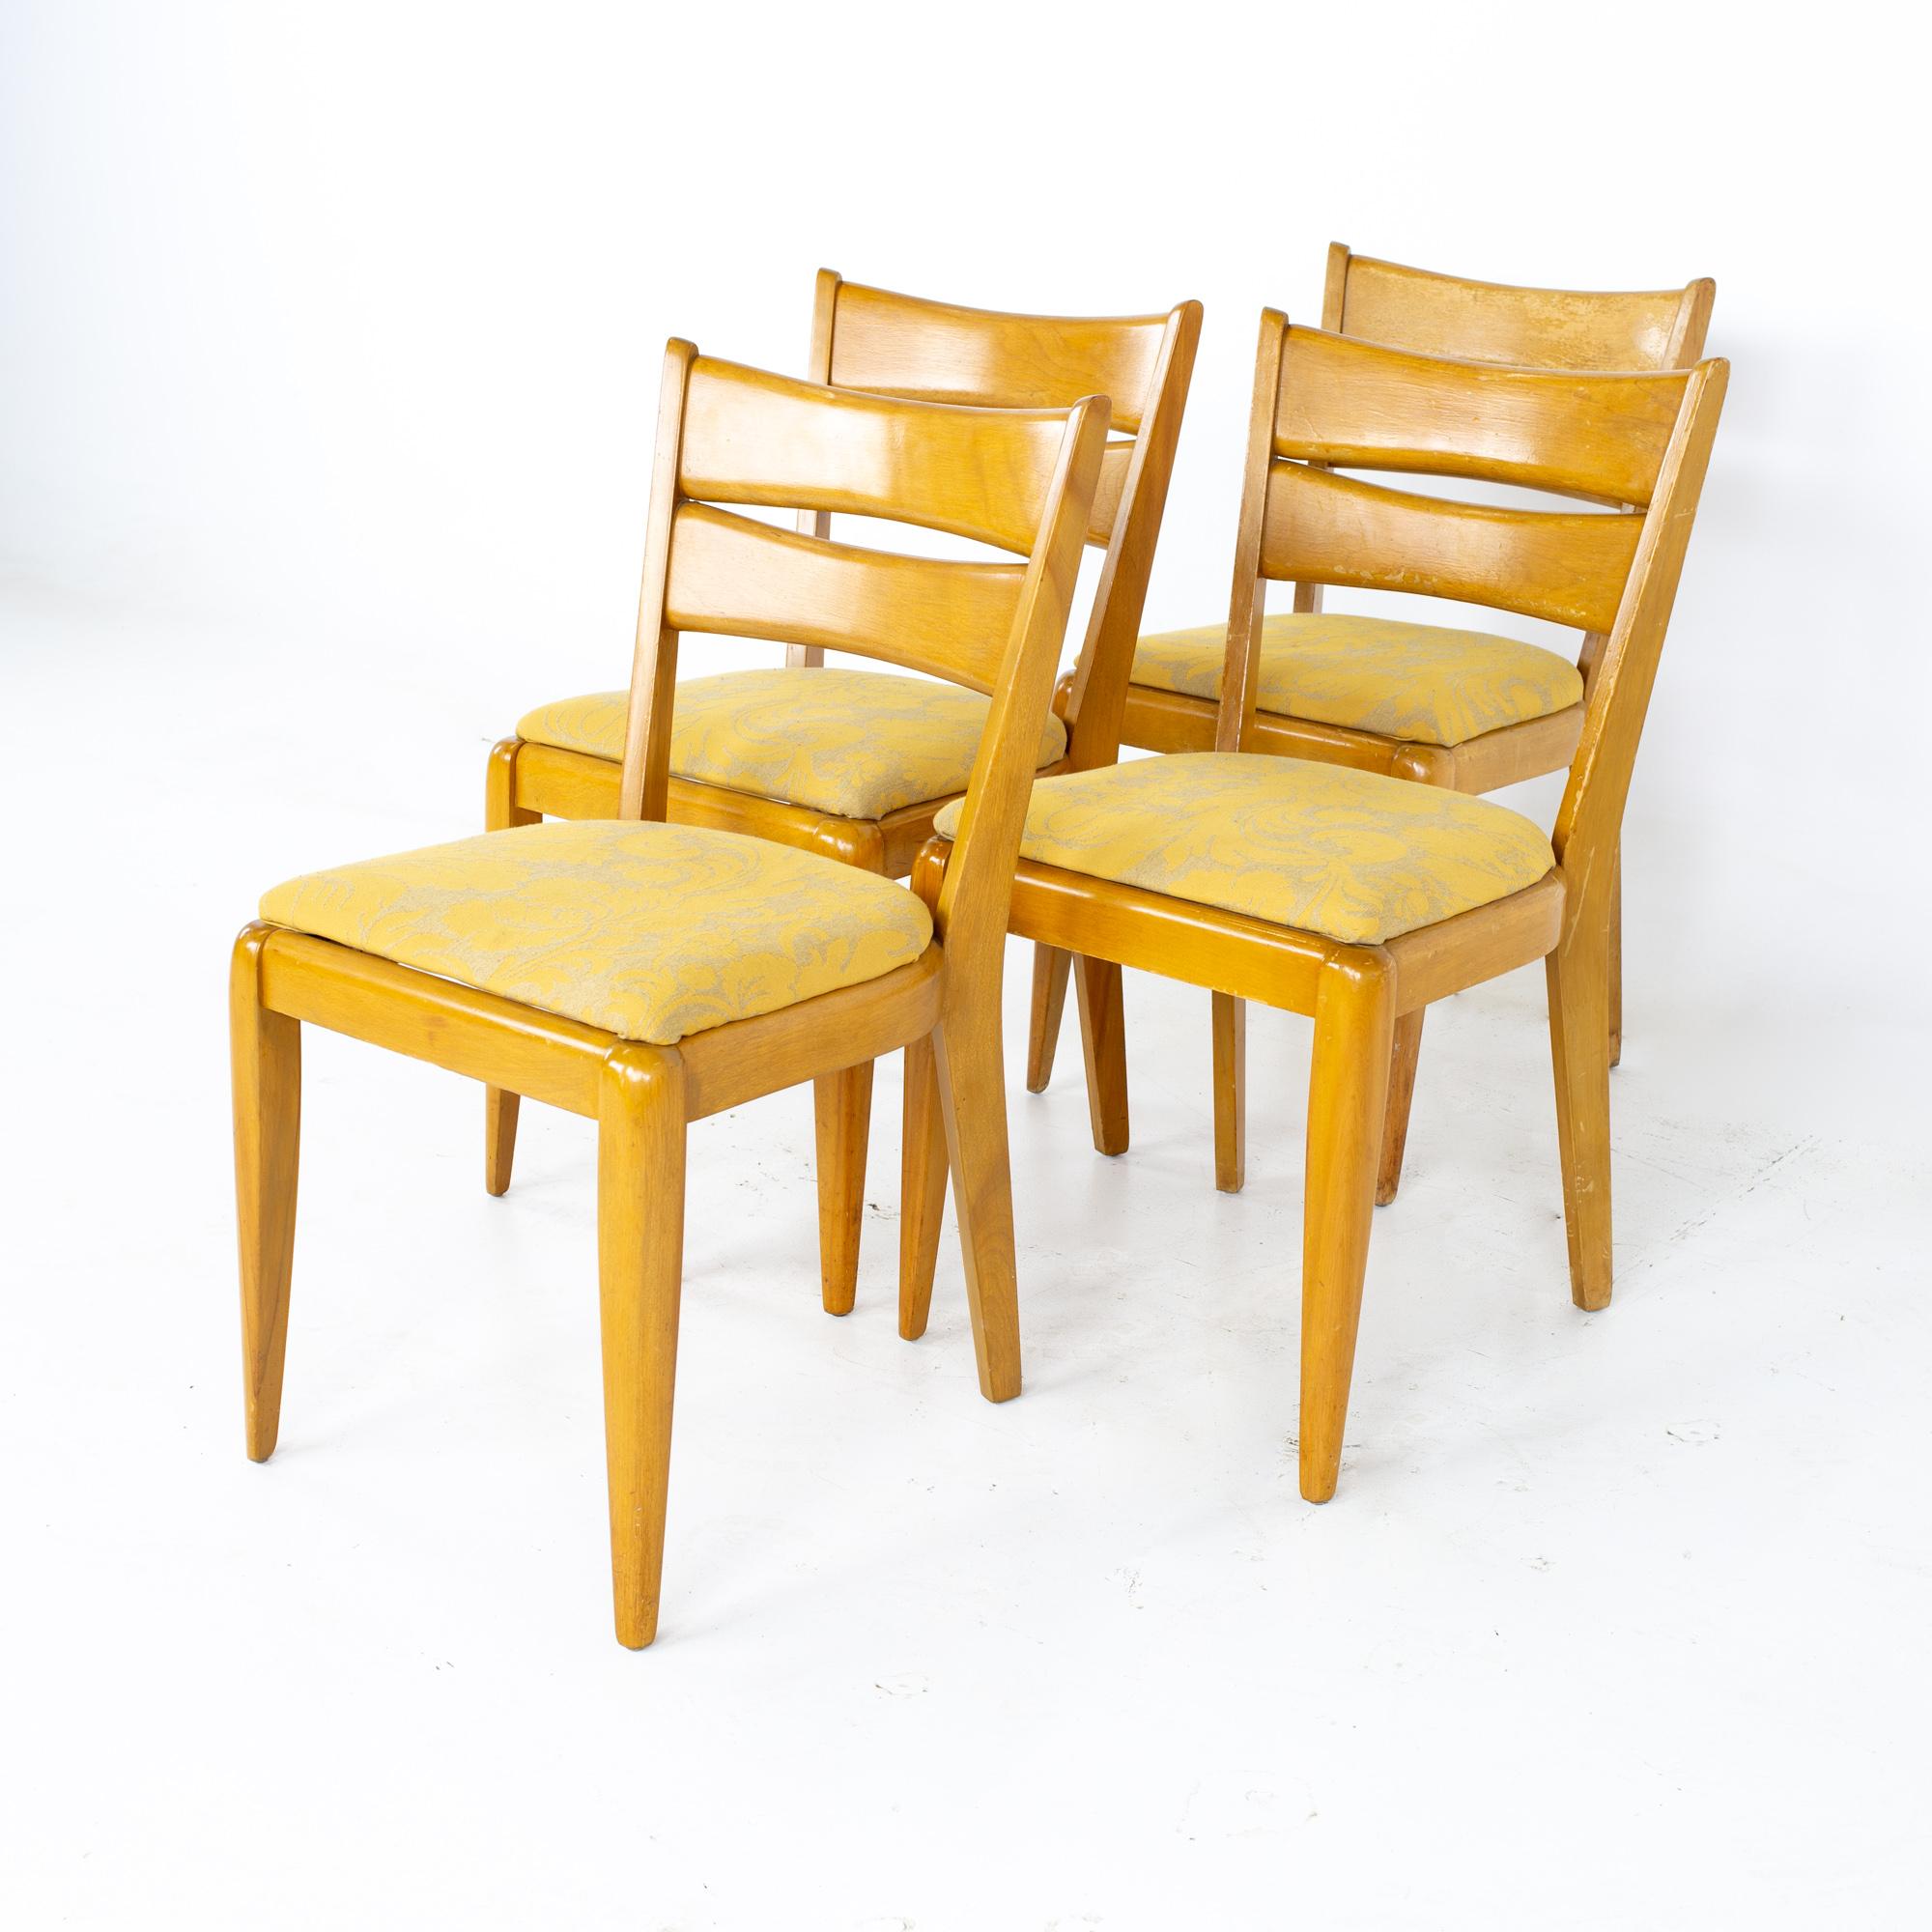 Heywood Wakefield M151 Mid Century dining chairs, set of 4
Each chair measures: 18 wide x 17 deep x 32 high, with a seat height of 19 inches

All pieces of furniture can be had in what we call restored vintage condition. That means the piece is